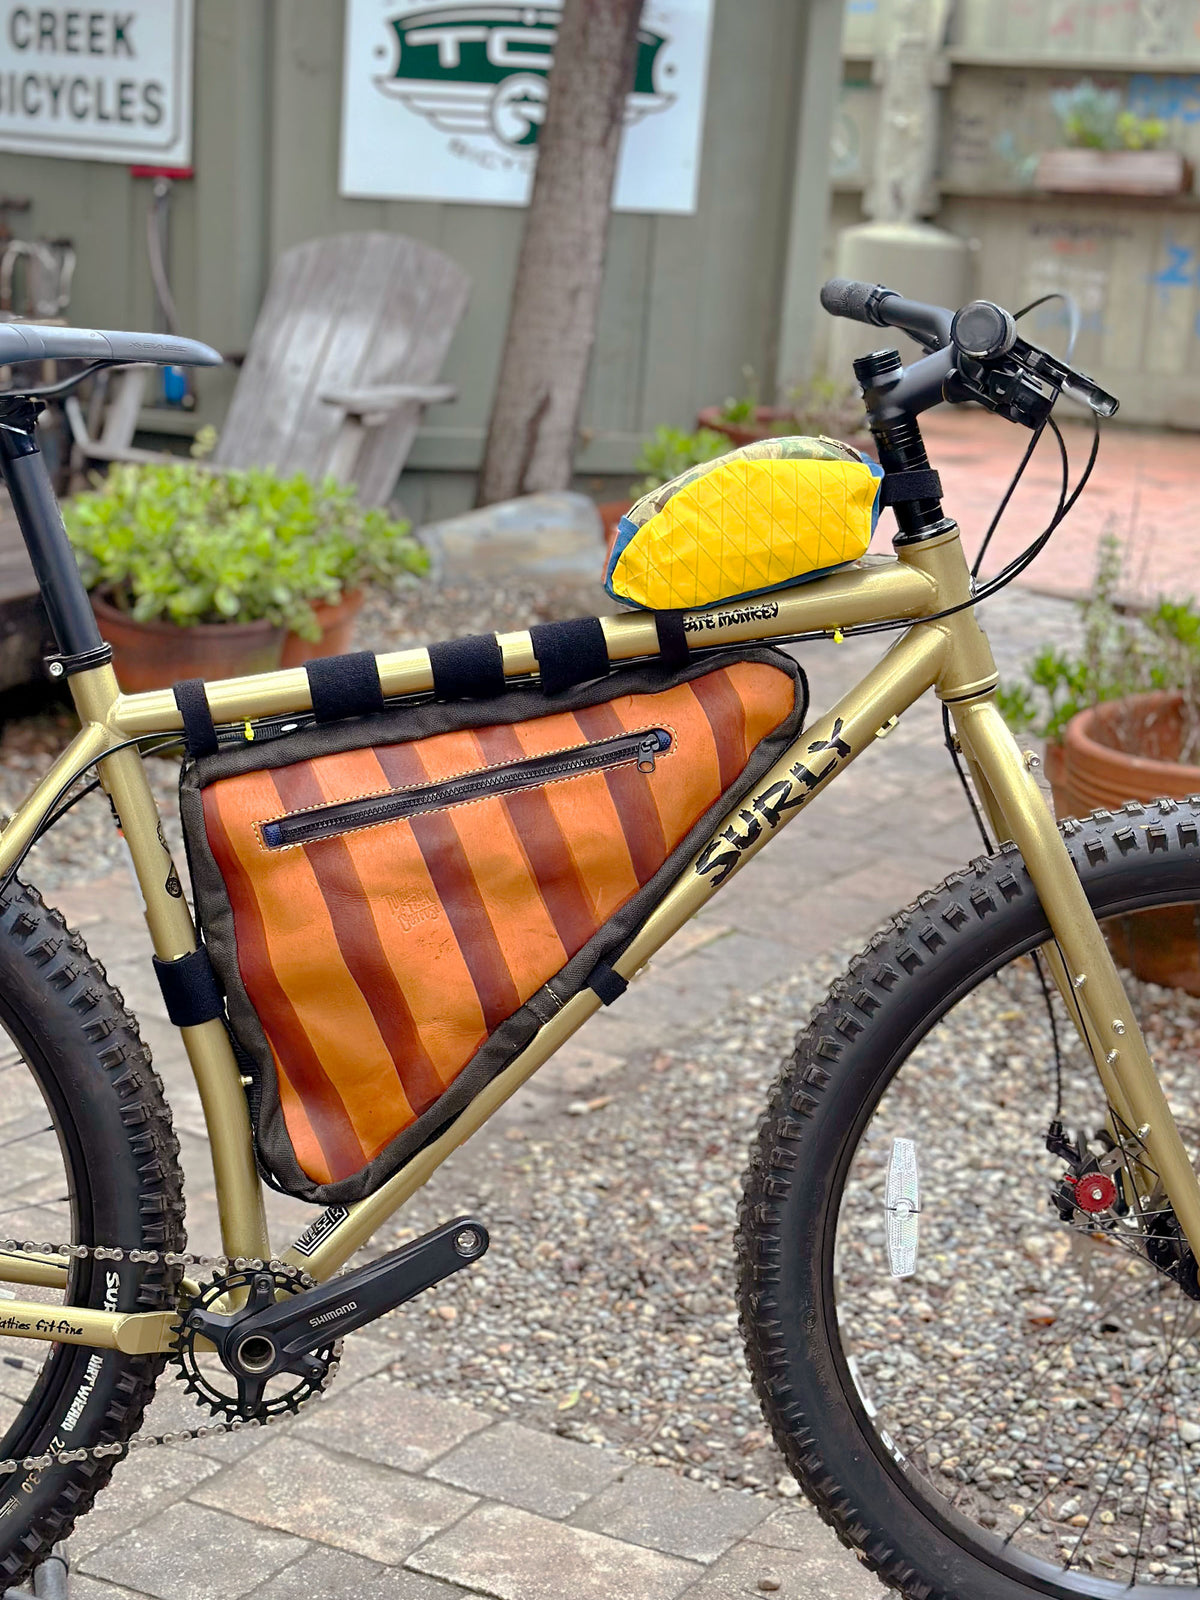 The Nut Case Top Tube Bag